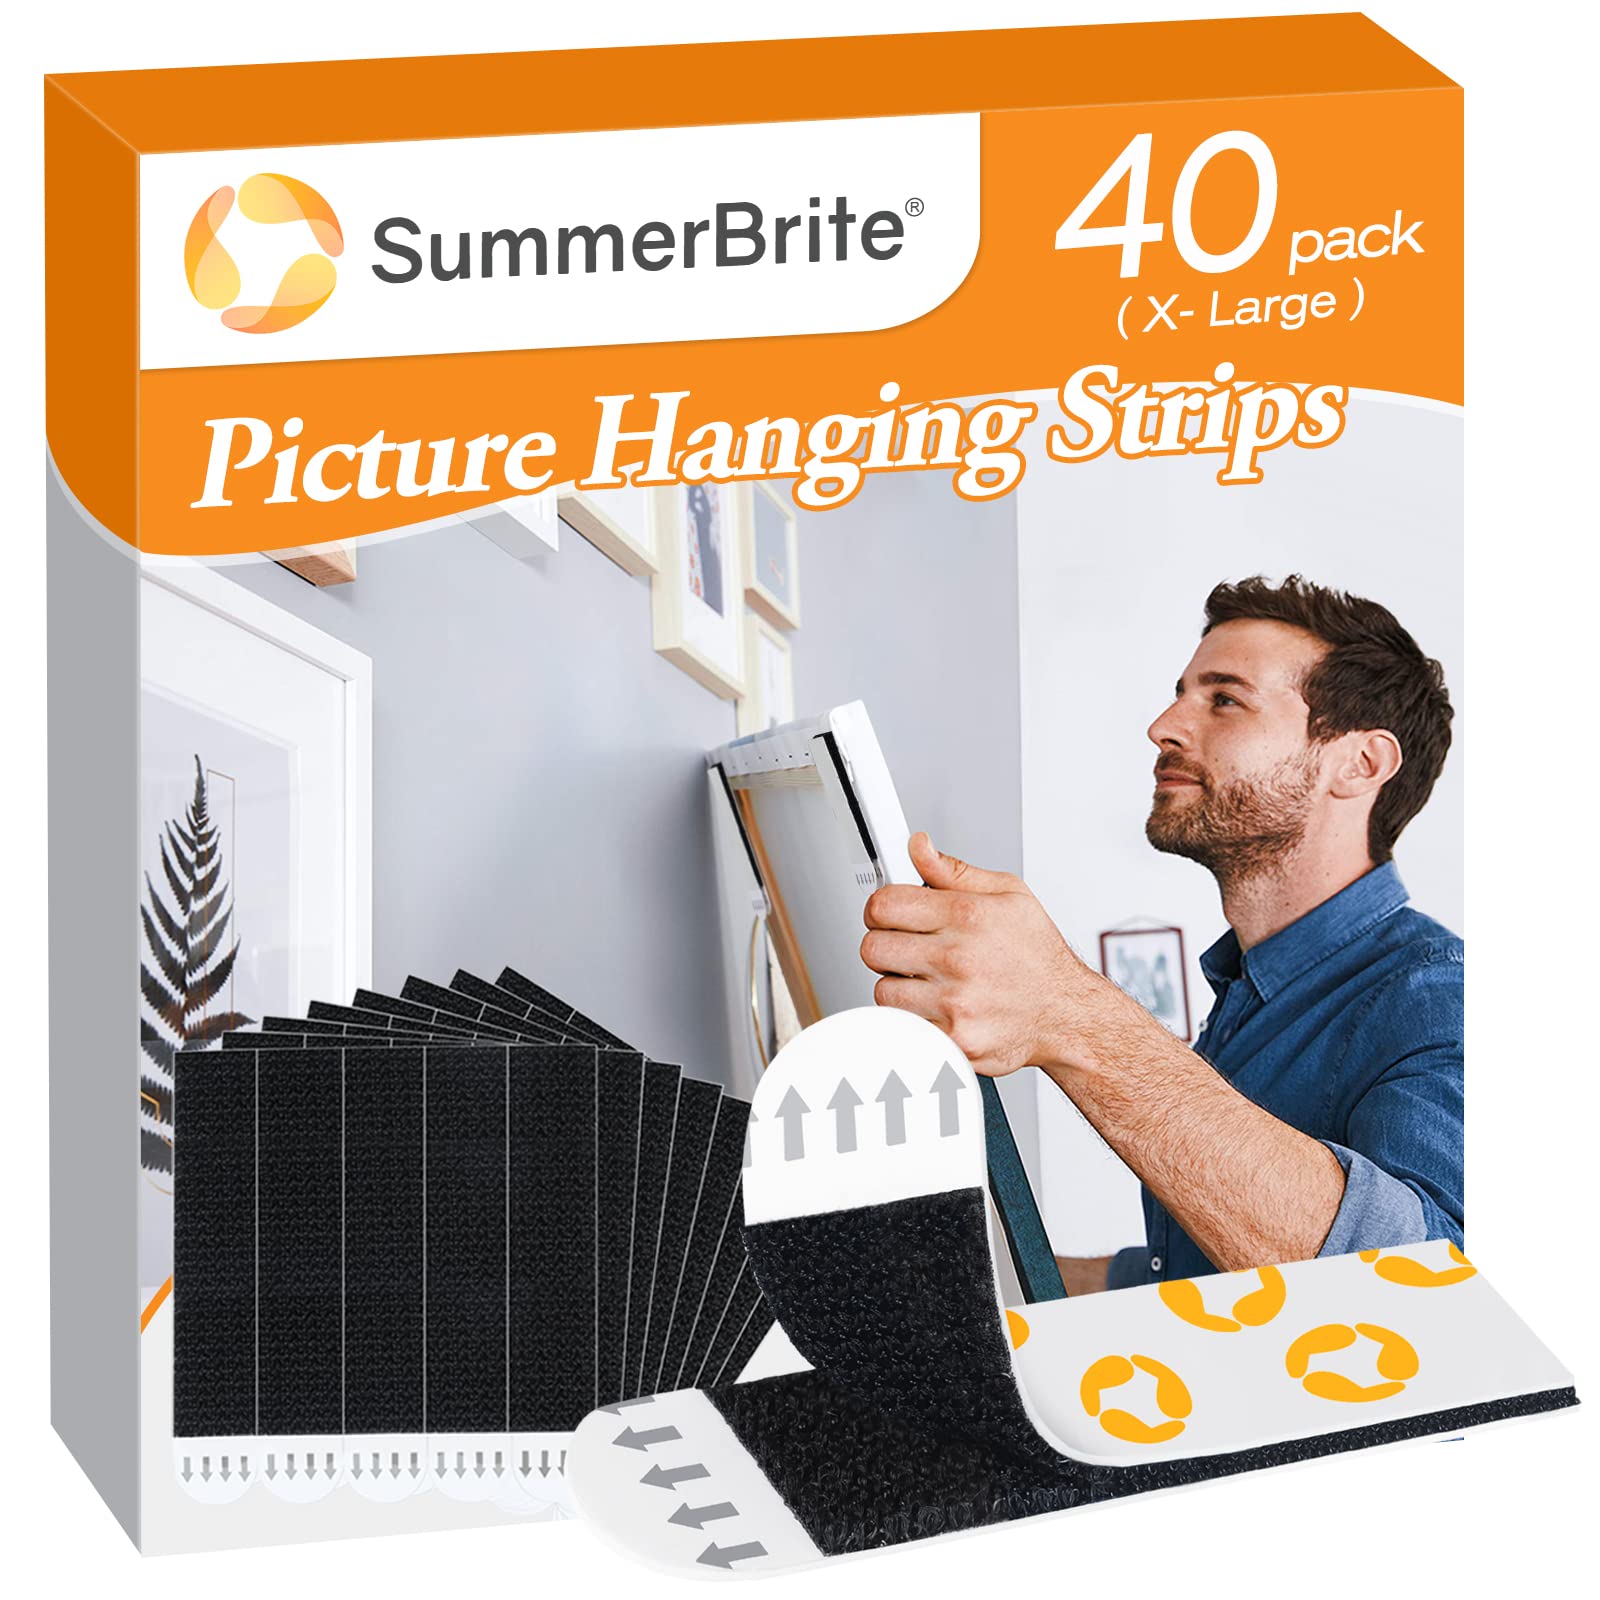 SummerBrite Picture Hanging Strips,Heavy Duty Picture Hanger Kit